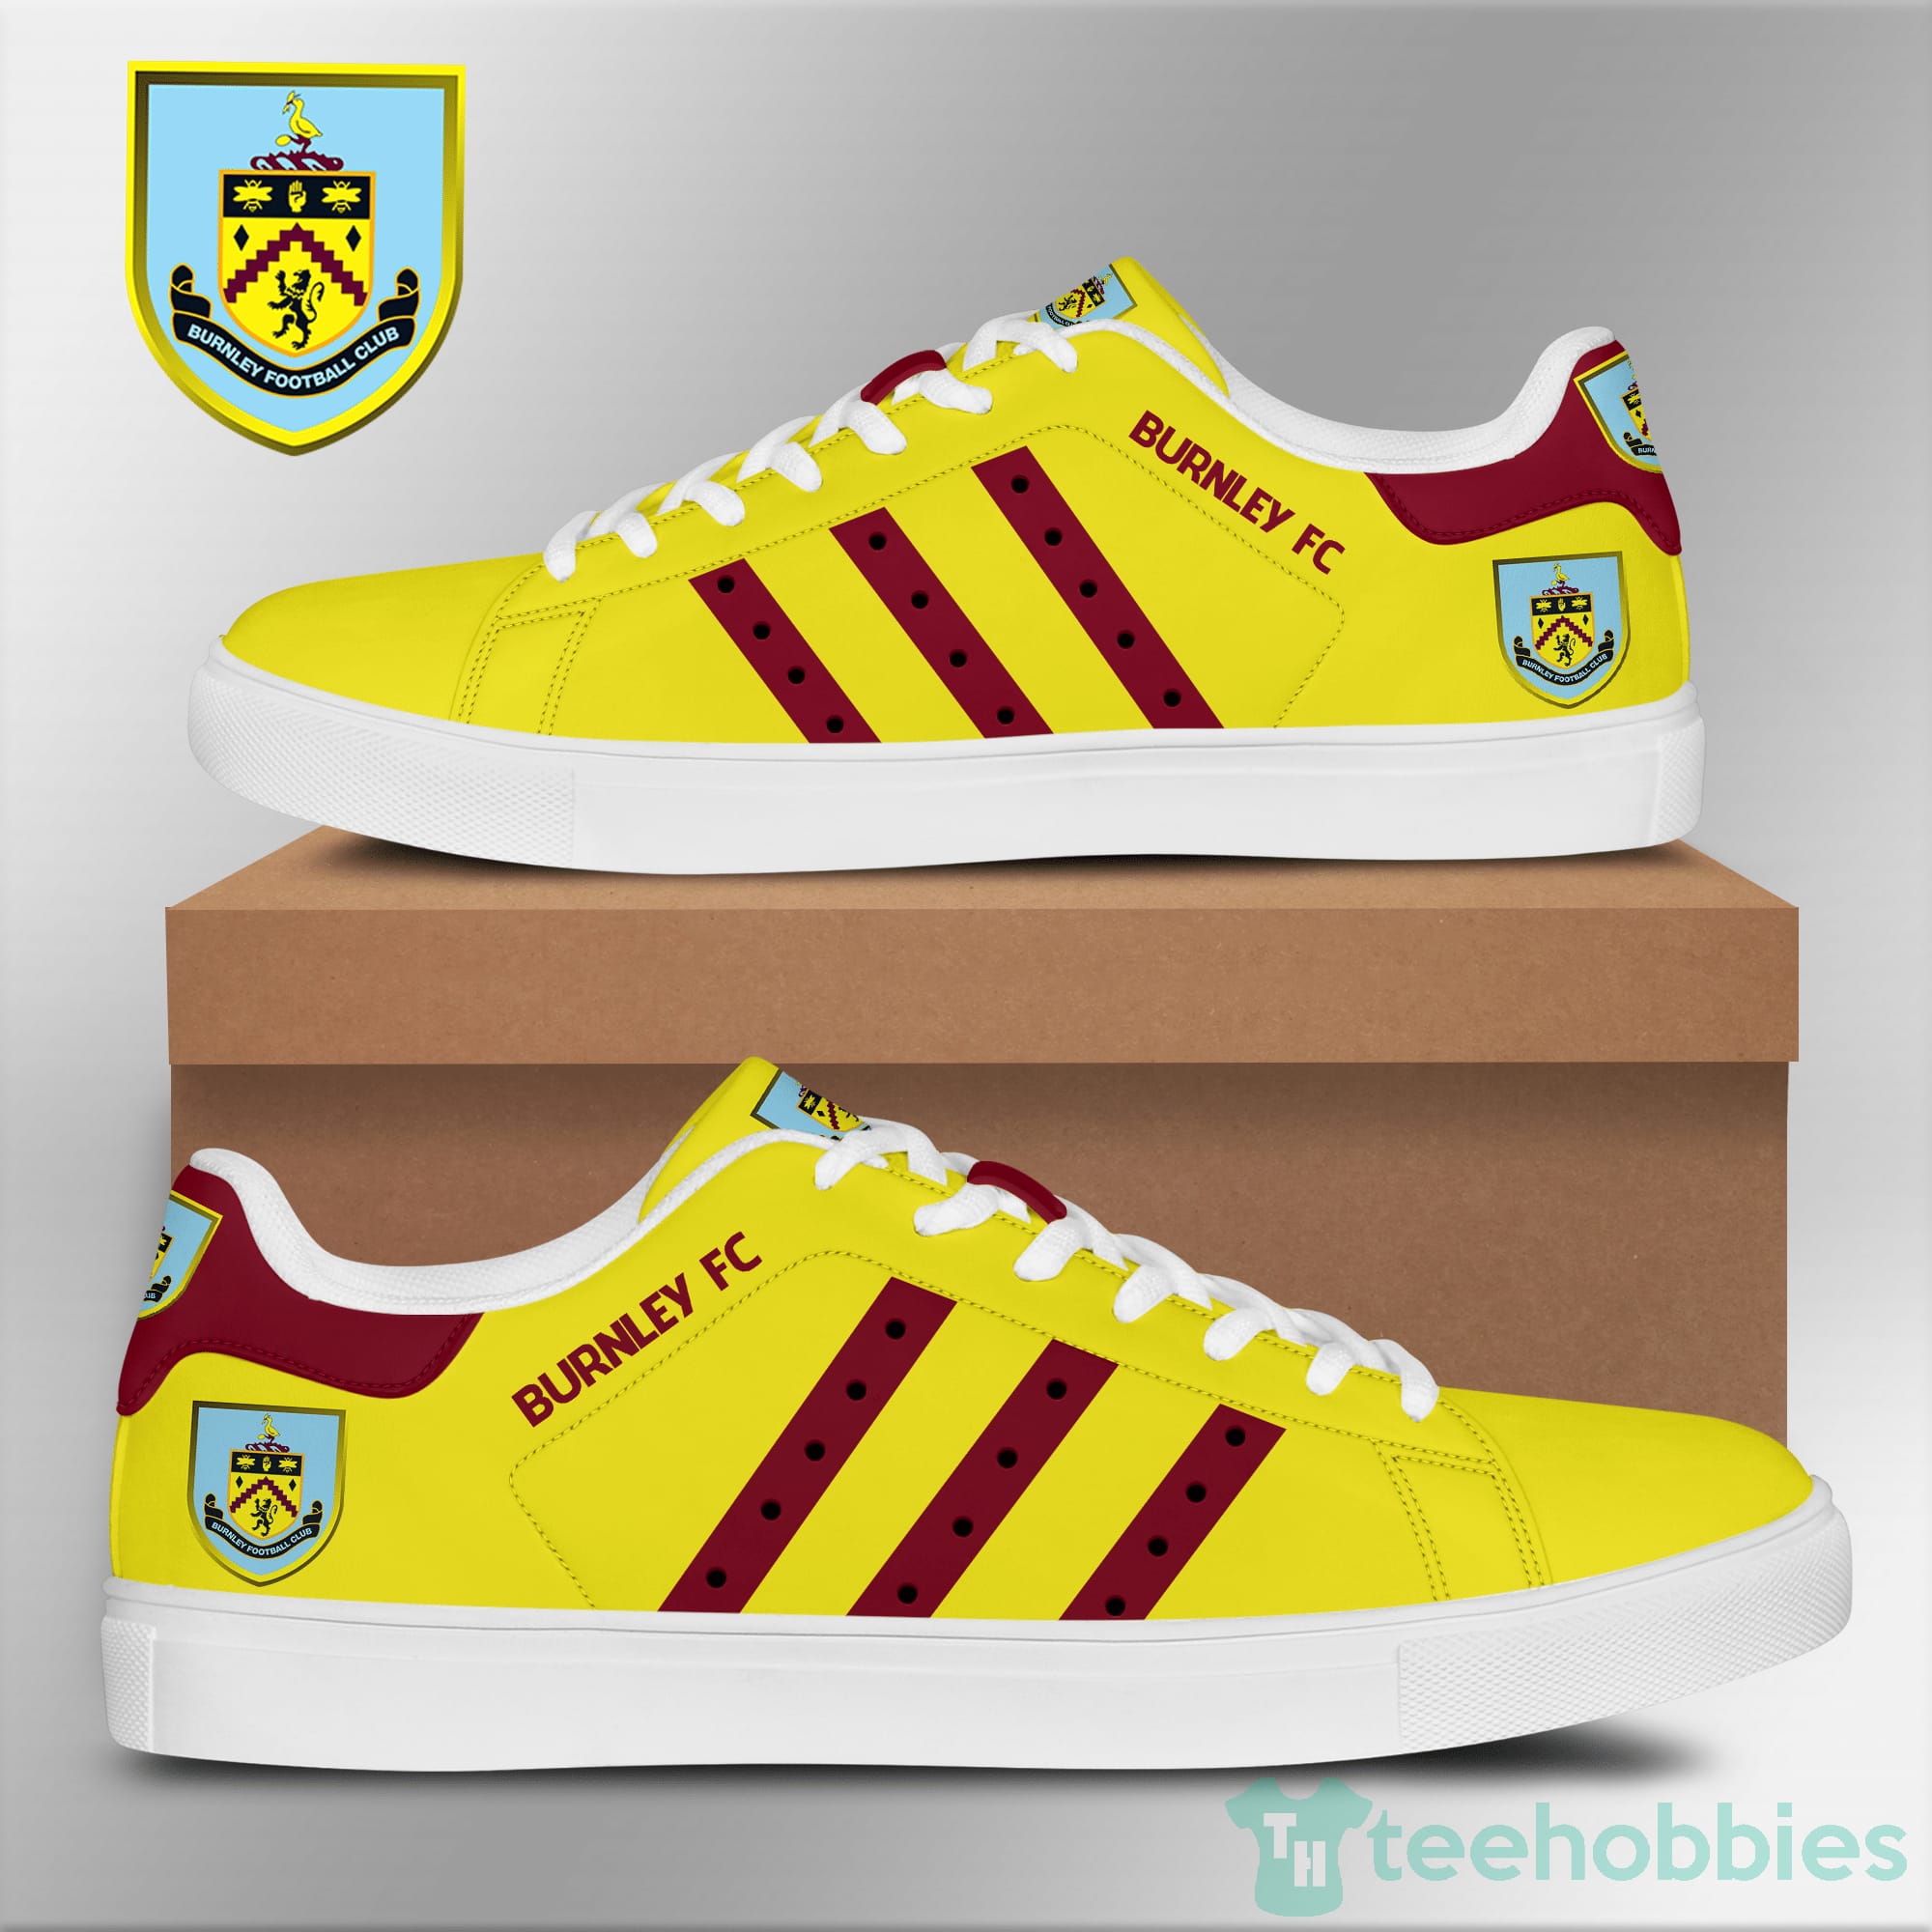 Burnley F.C Yellow Low Top Skate Shoes